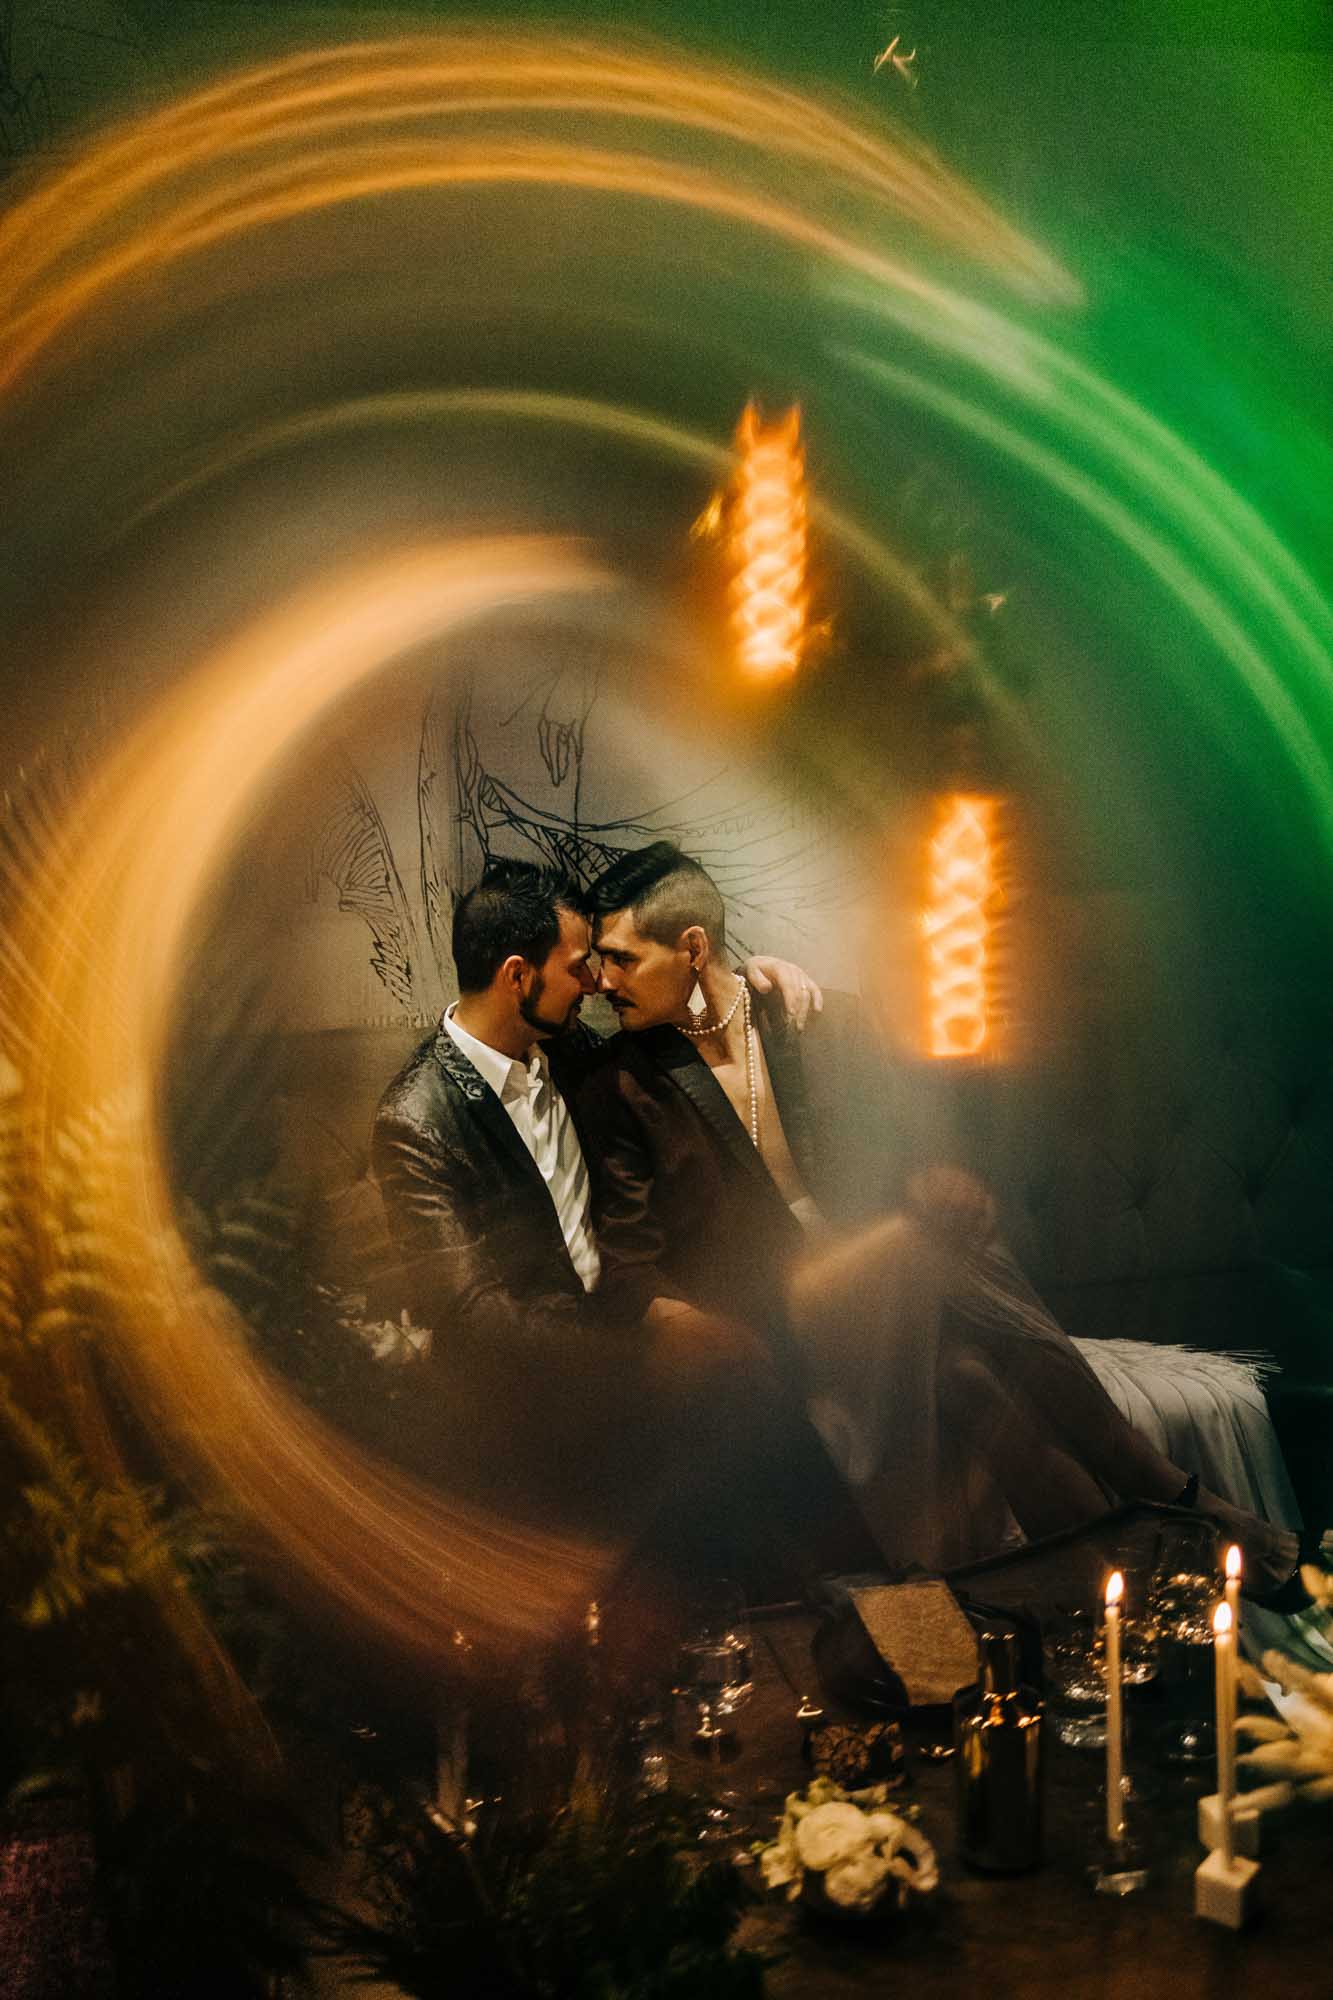  Elegance, style and gender fluidity at this styled shoot inside a speakeasy | Rebecca Stone Photography | Featured on Equally Wed, the leading LGBTQ+ wedding magazine 